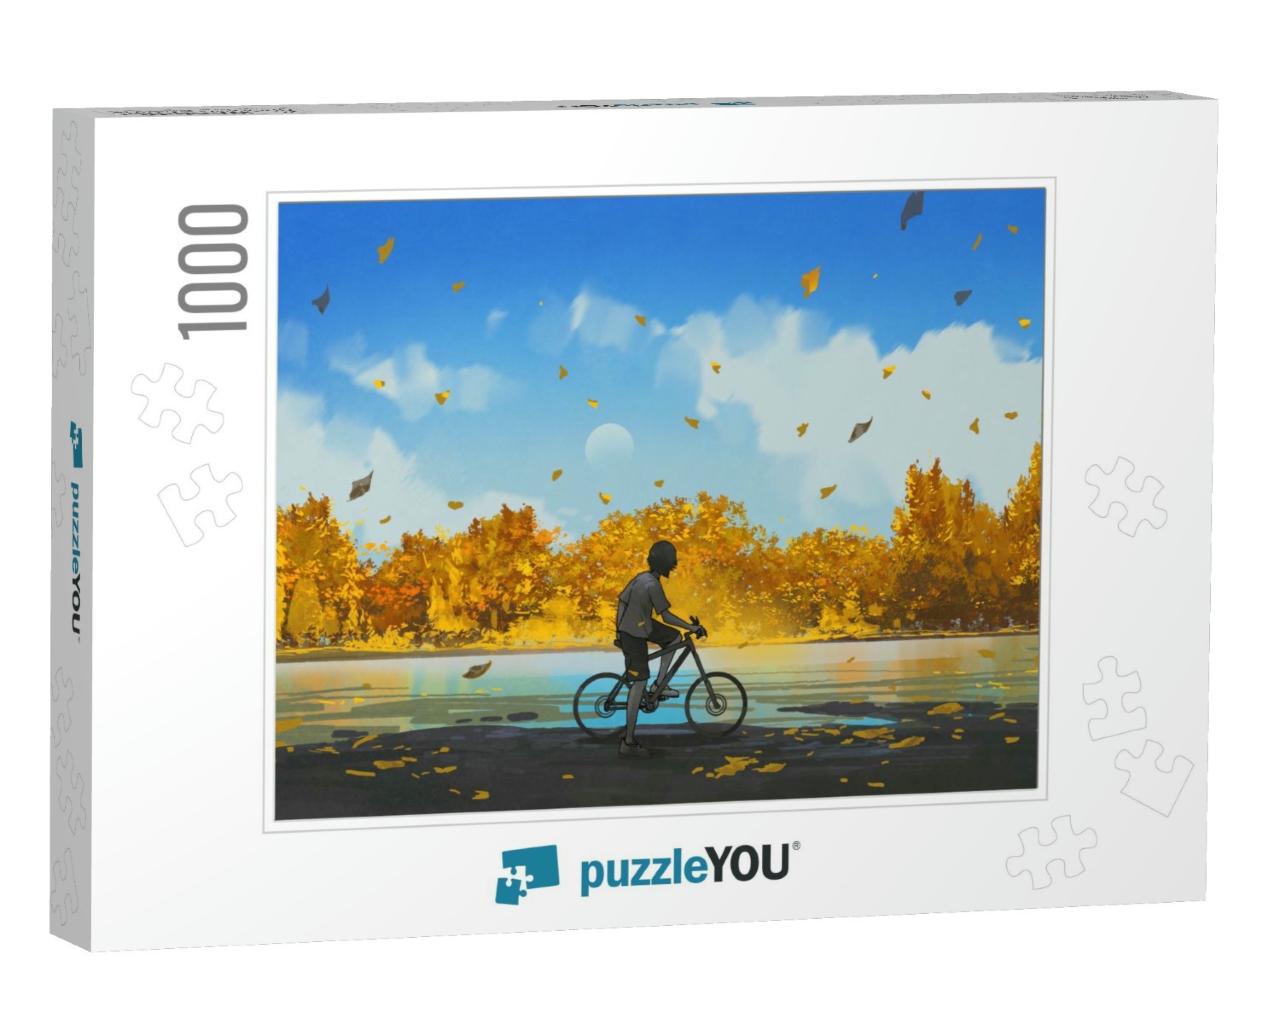 Boy on a Bicycle Looking At the Autumn View, Digital Art... Jigsaw Puzzle with 1000 pieces